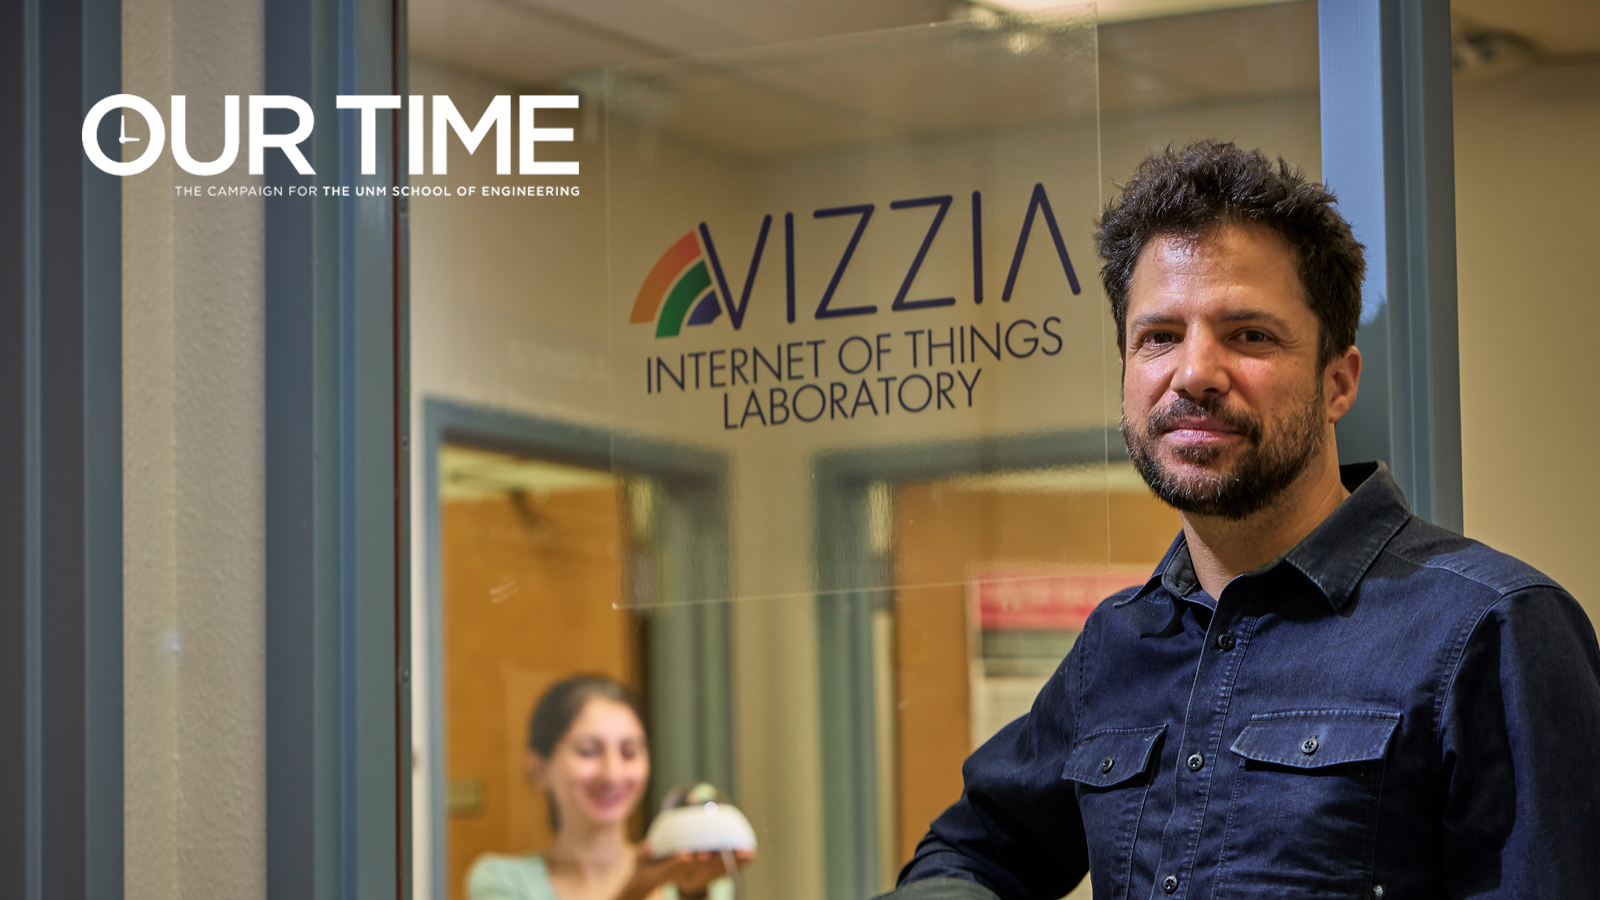 Vizzia IoT Lab focuses on the future of patient care, boosting partnerships